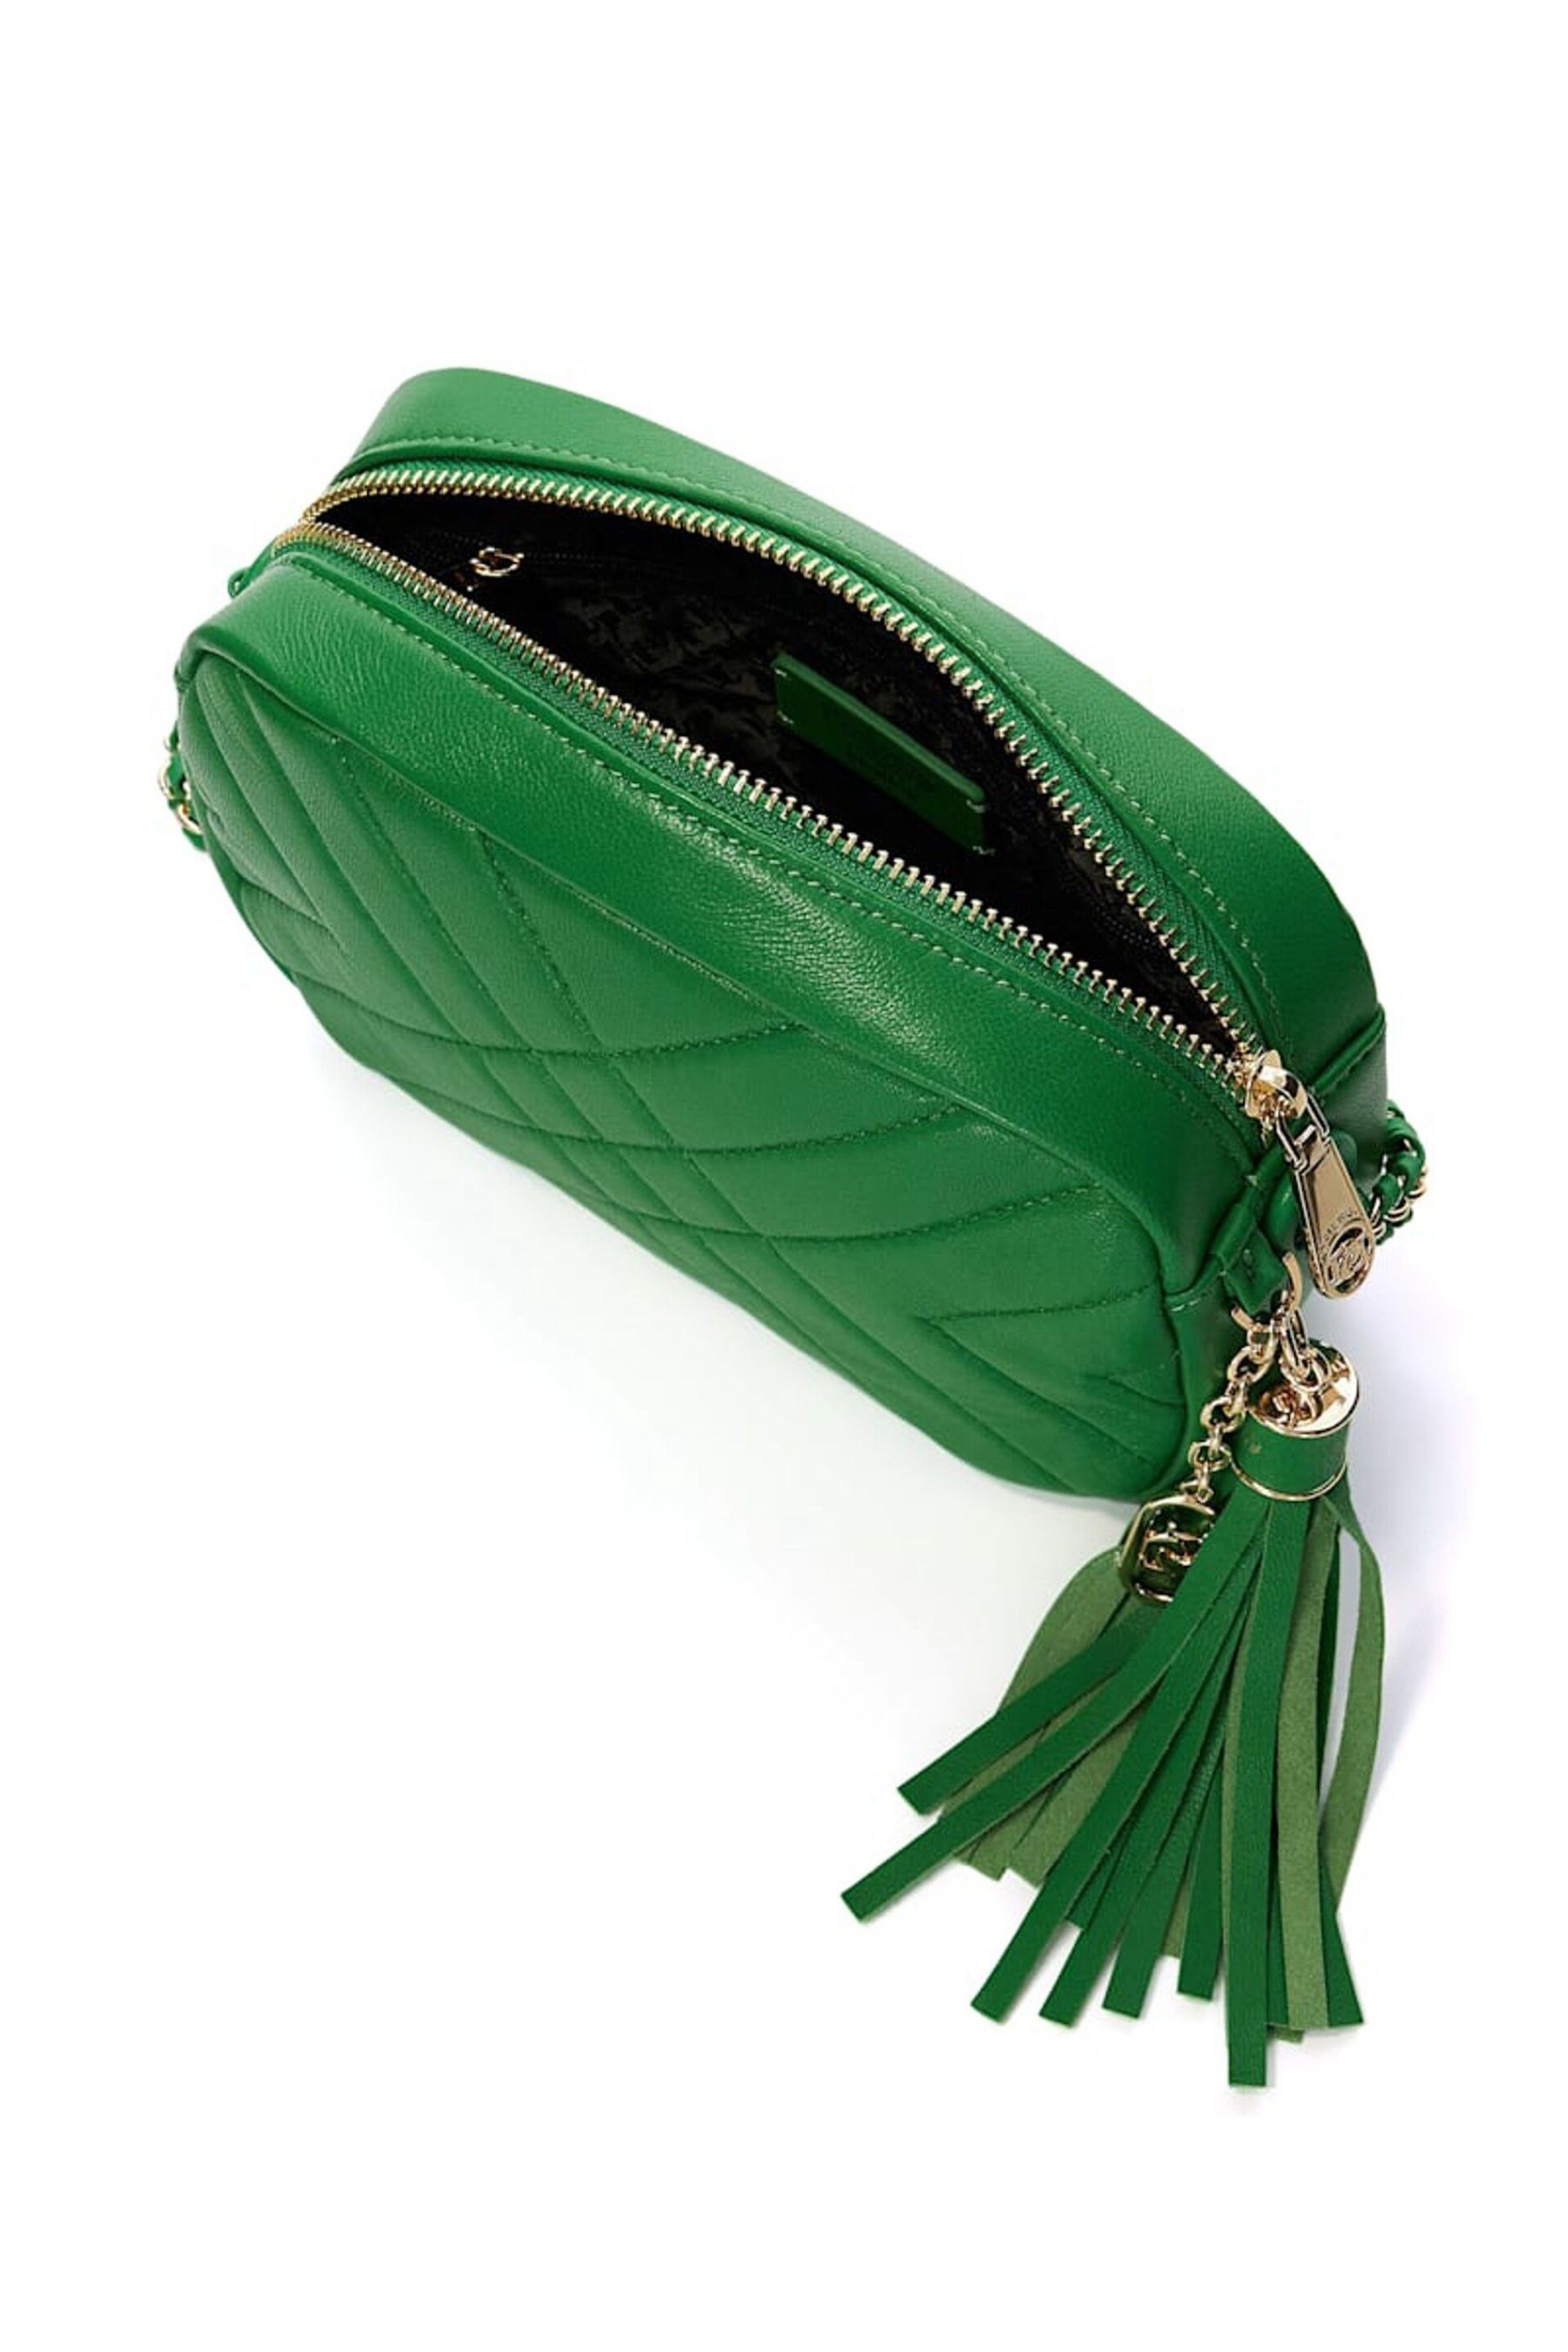 Dune London Green Chancery Small Leather Cross-Body Bag - Image 7 of 9